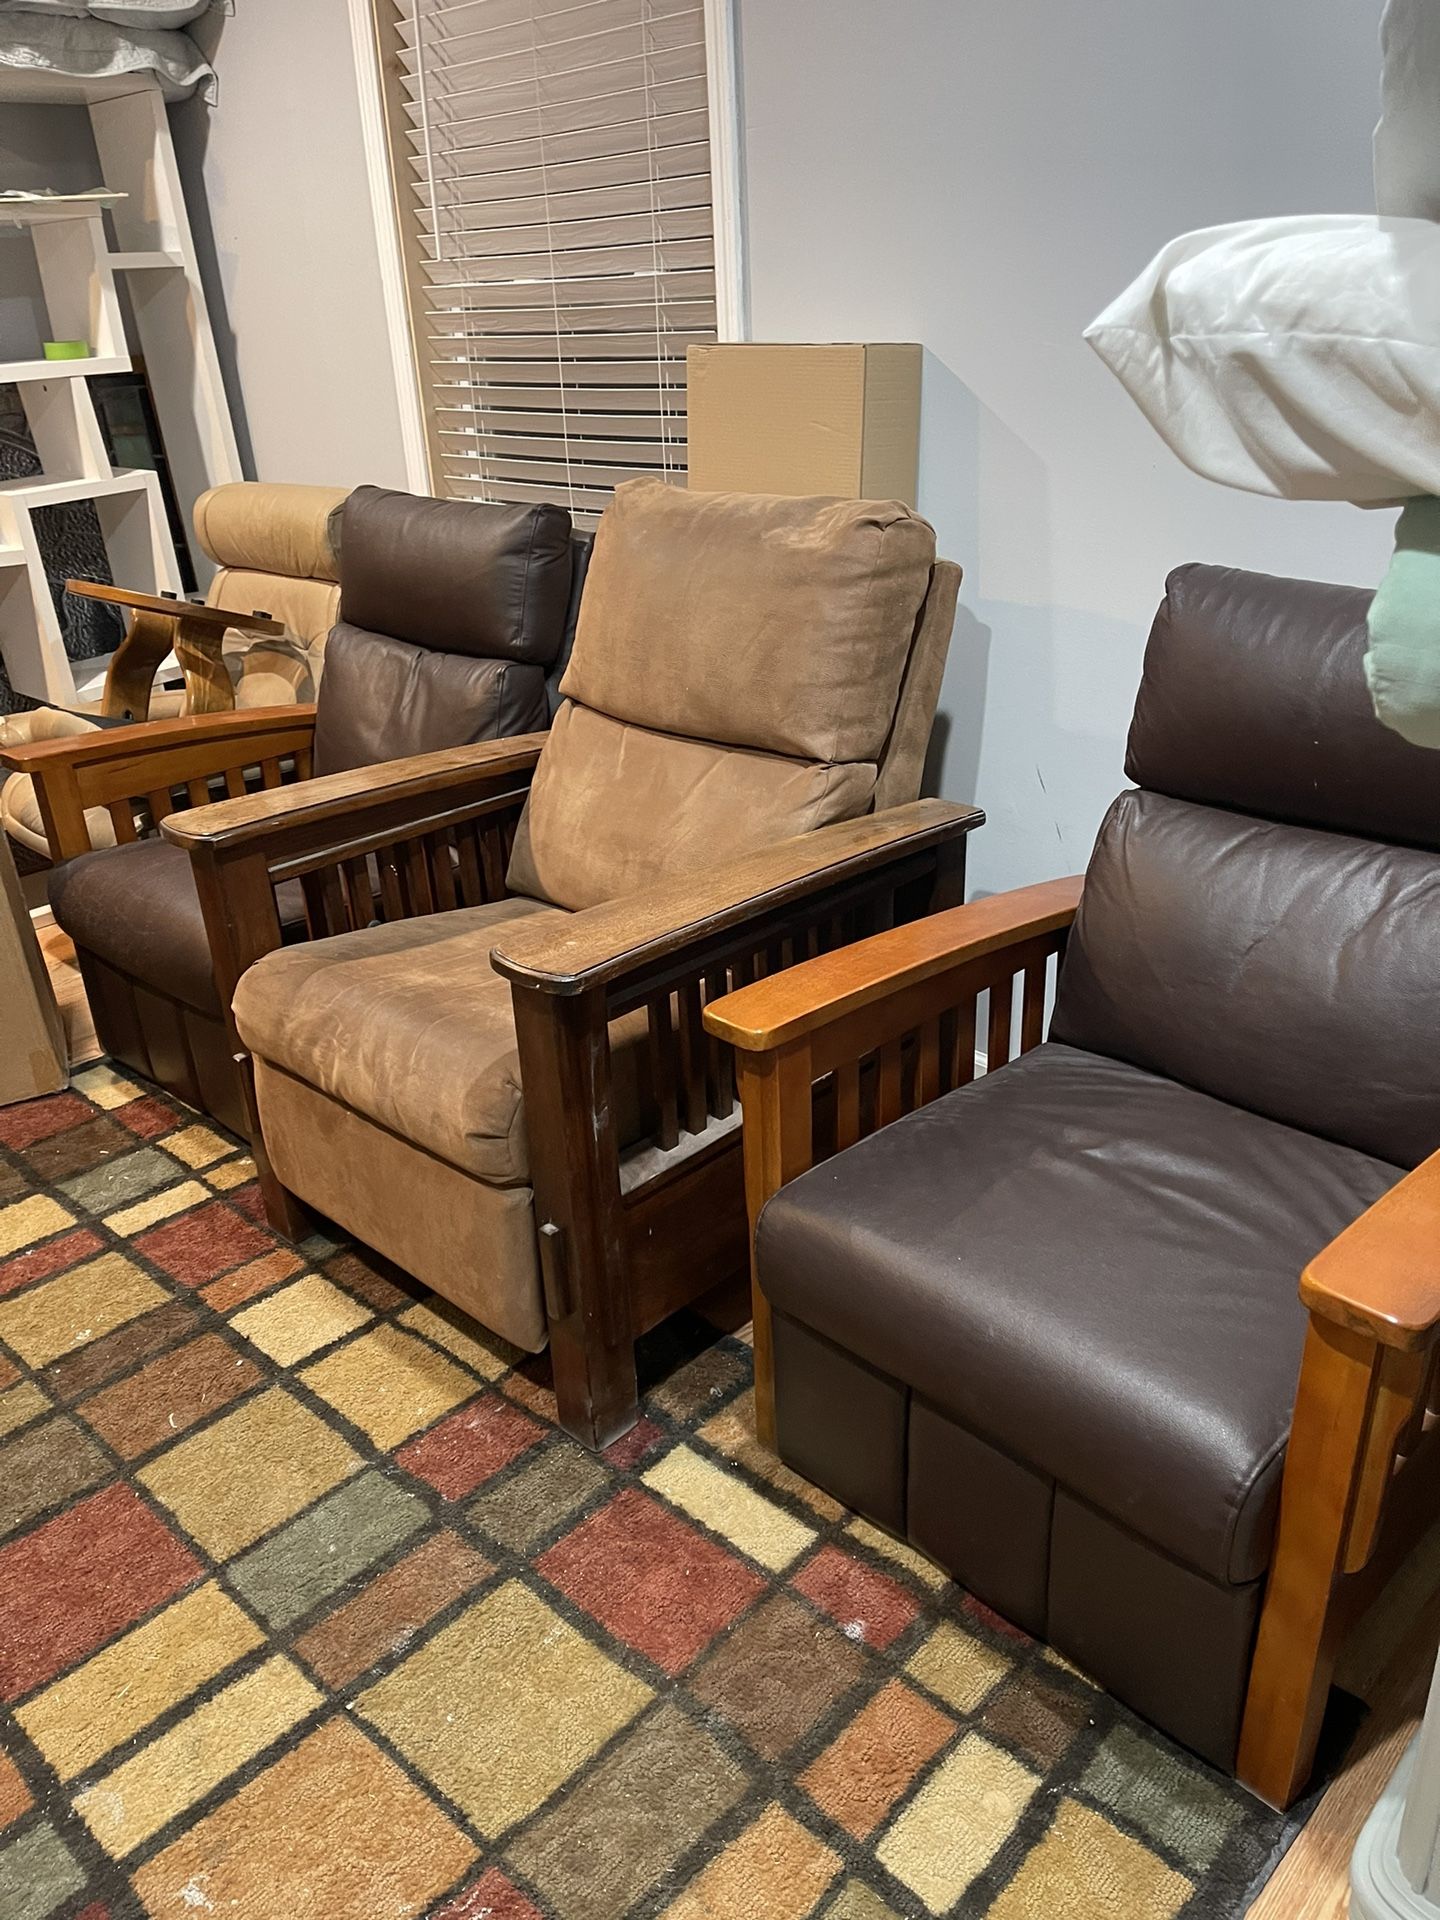 Mission Style Recliners!